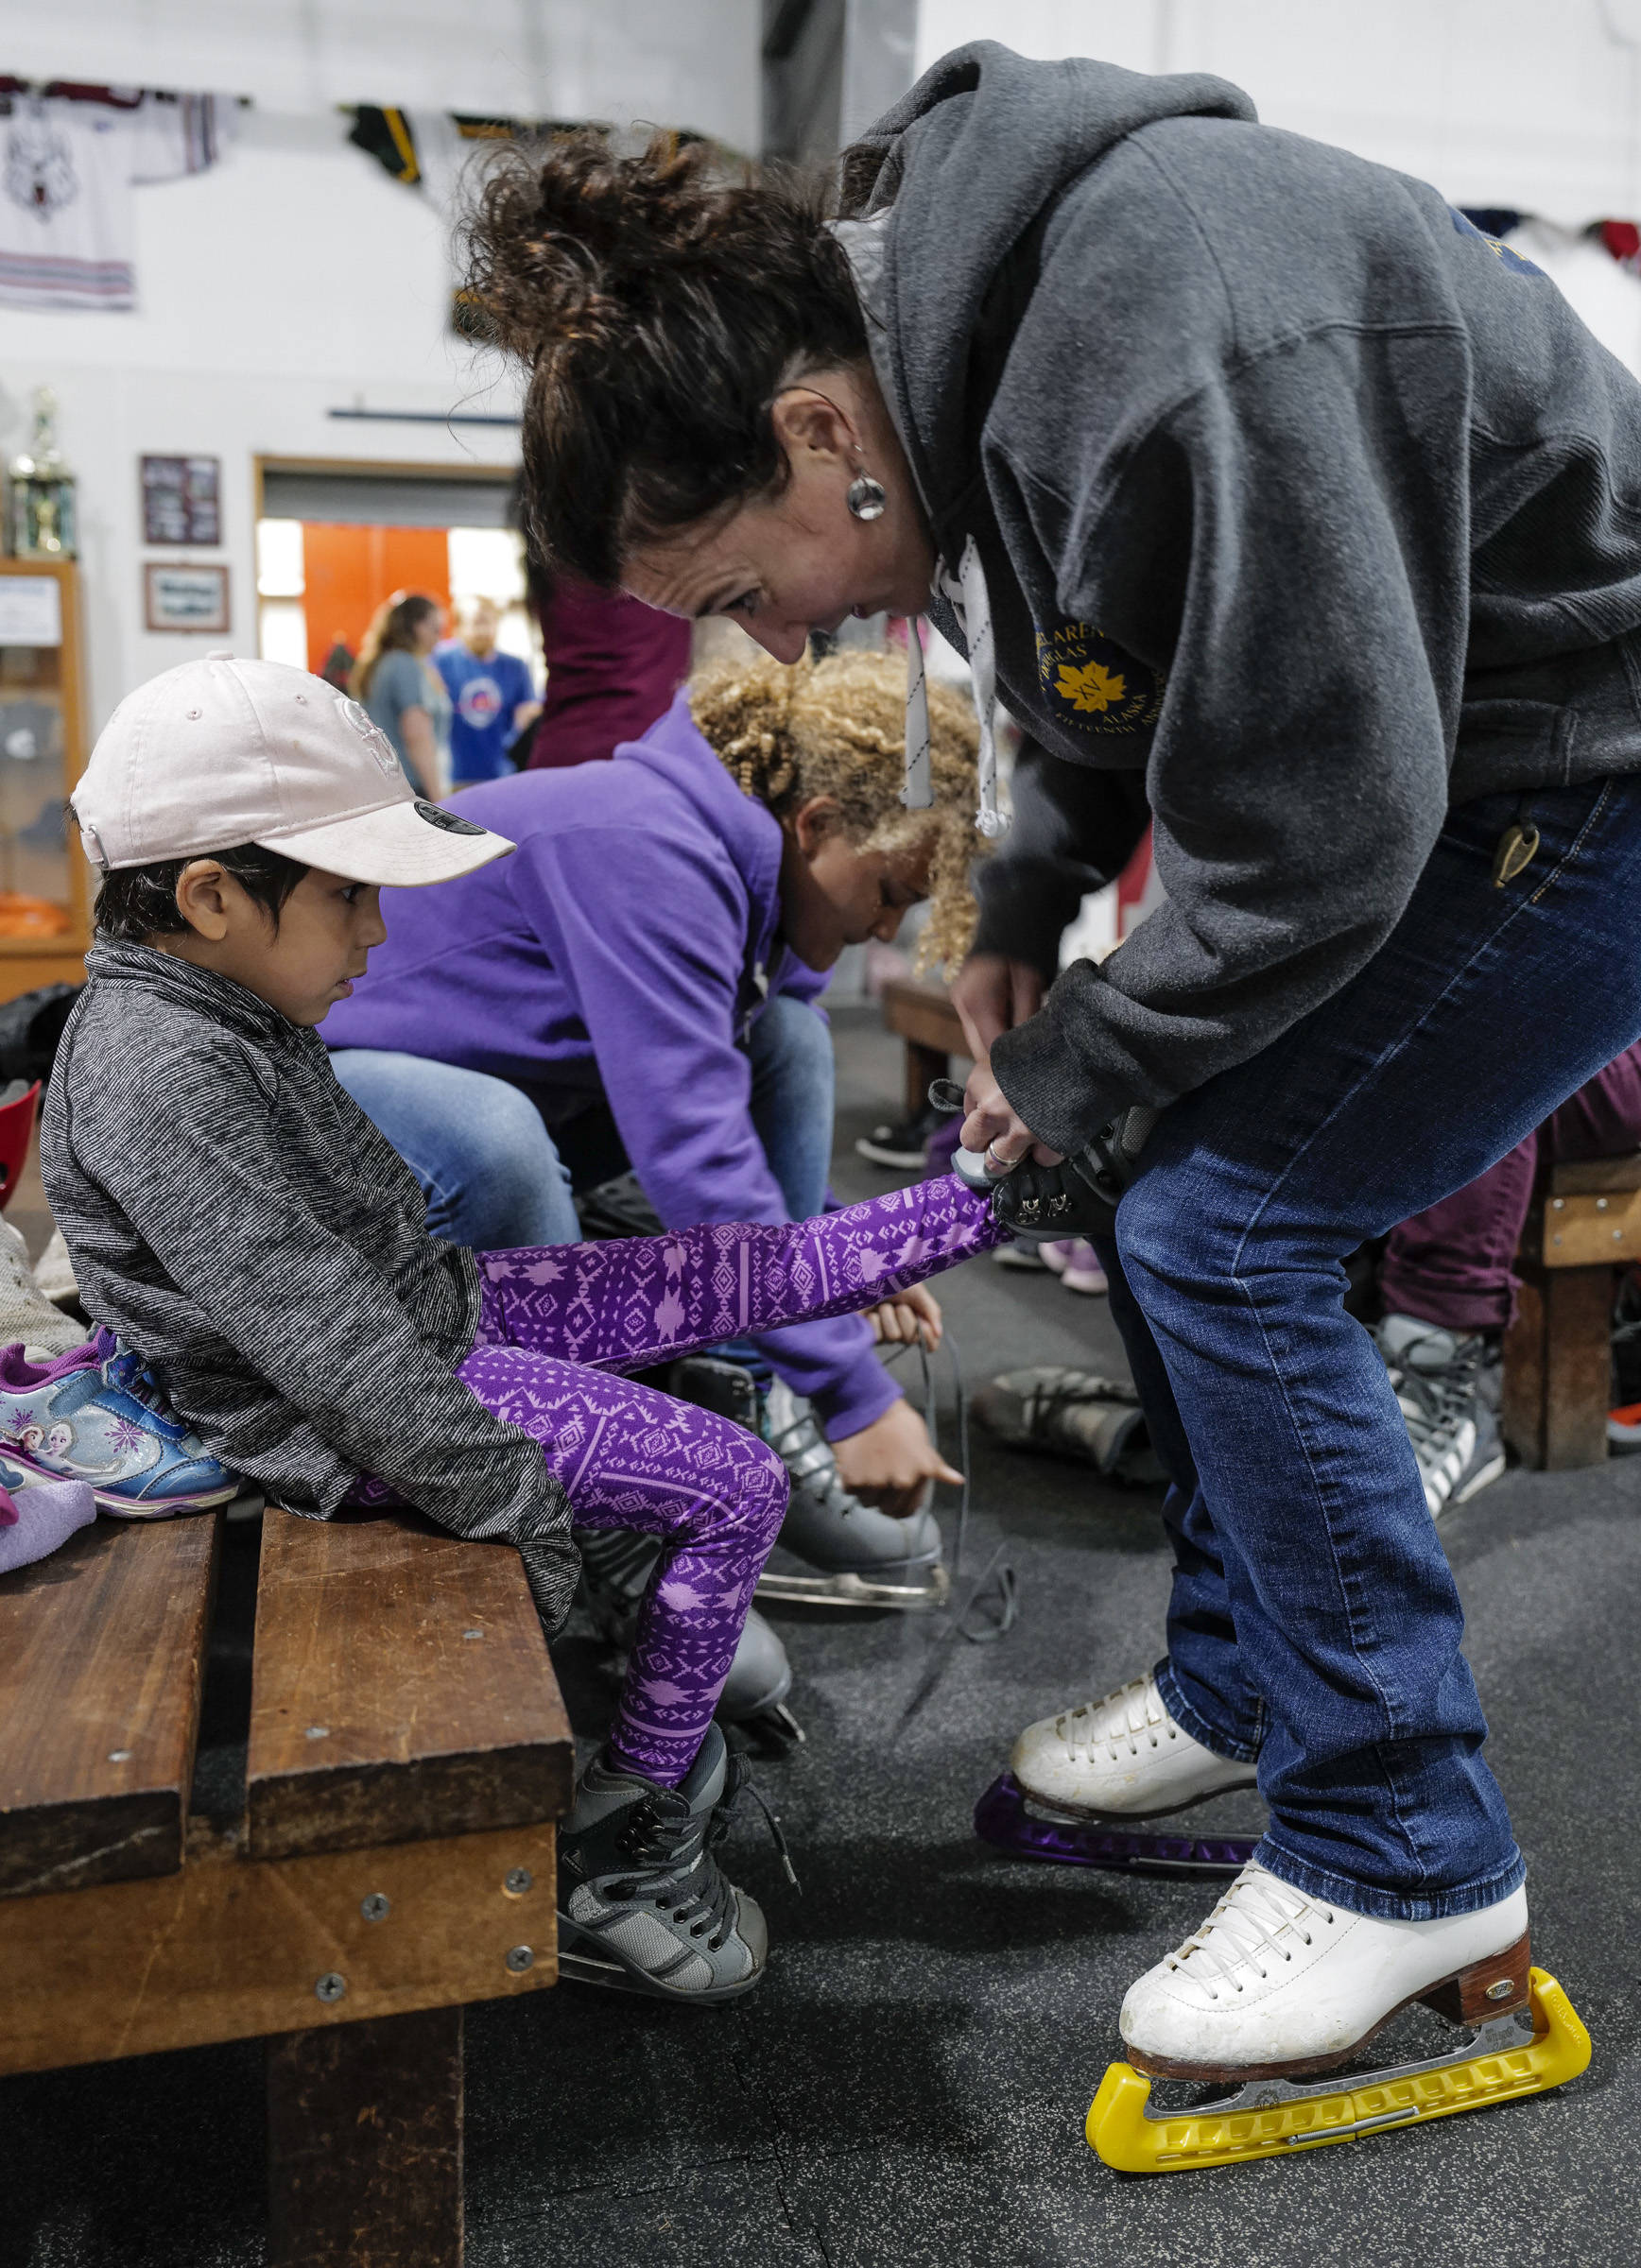 Treadwell Arena Manager Lauren Anderson helps a youngster with her skates during of a free skate on the opening day at the Treadwell Arena on Monday, Aug. 5, 2019. (Michael Penn | Juneau Empire)